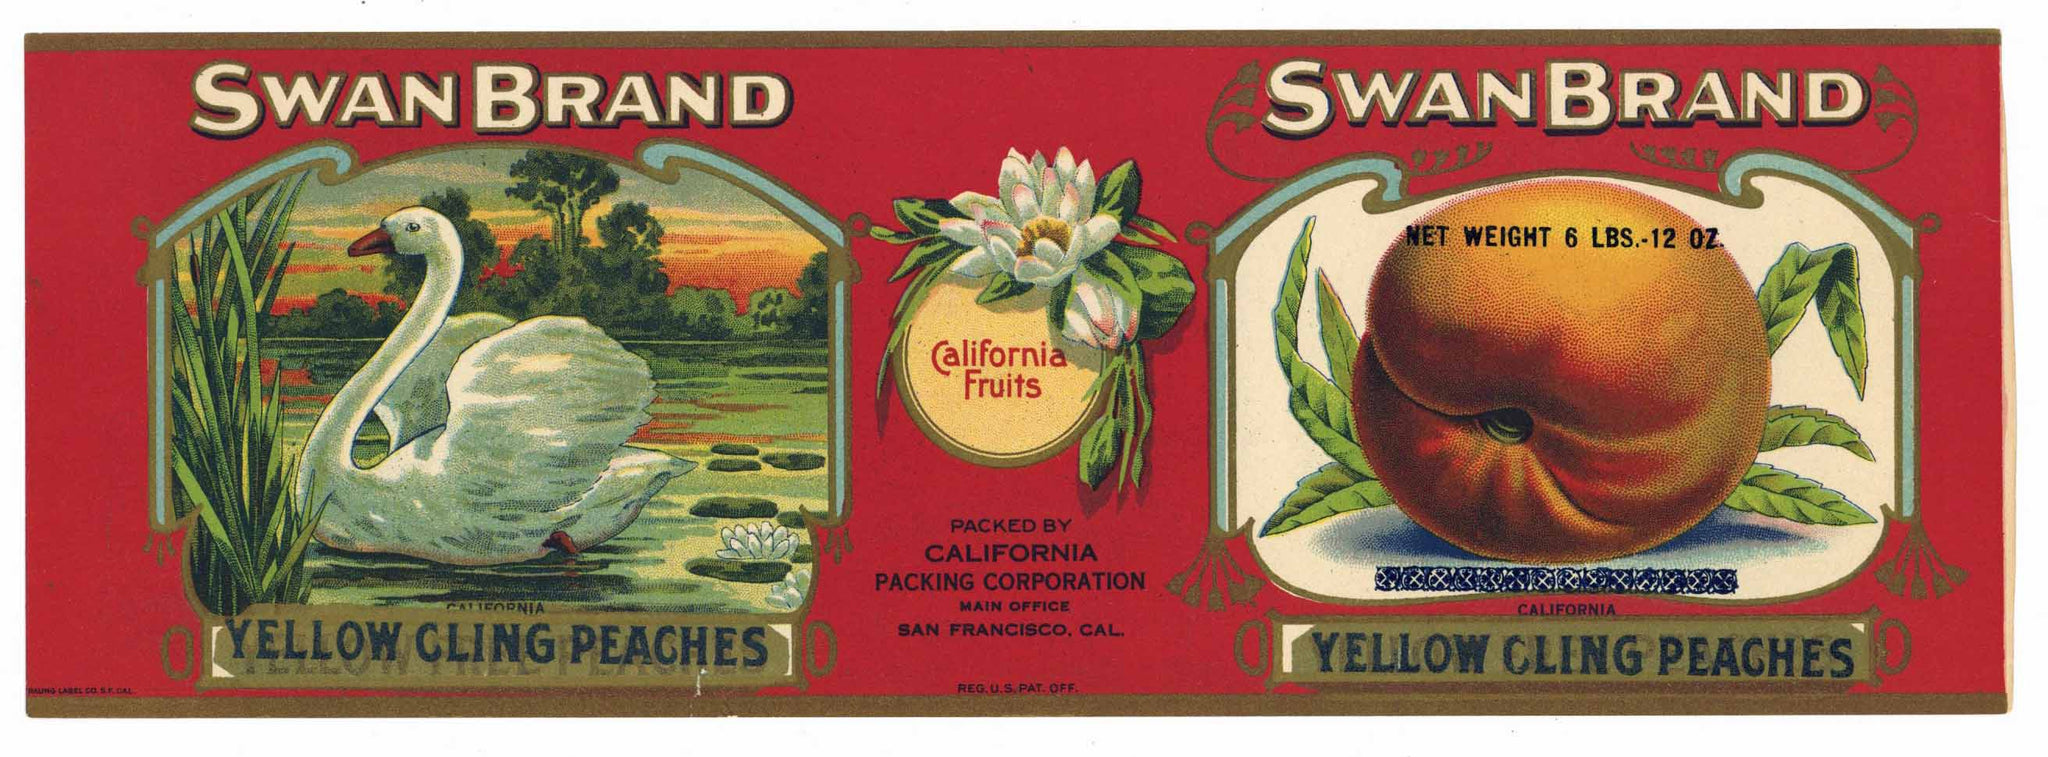 Swan Brand Vintage Peach Can Label